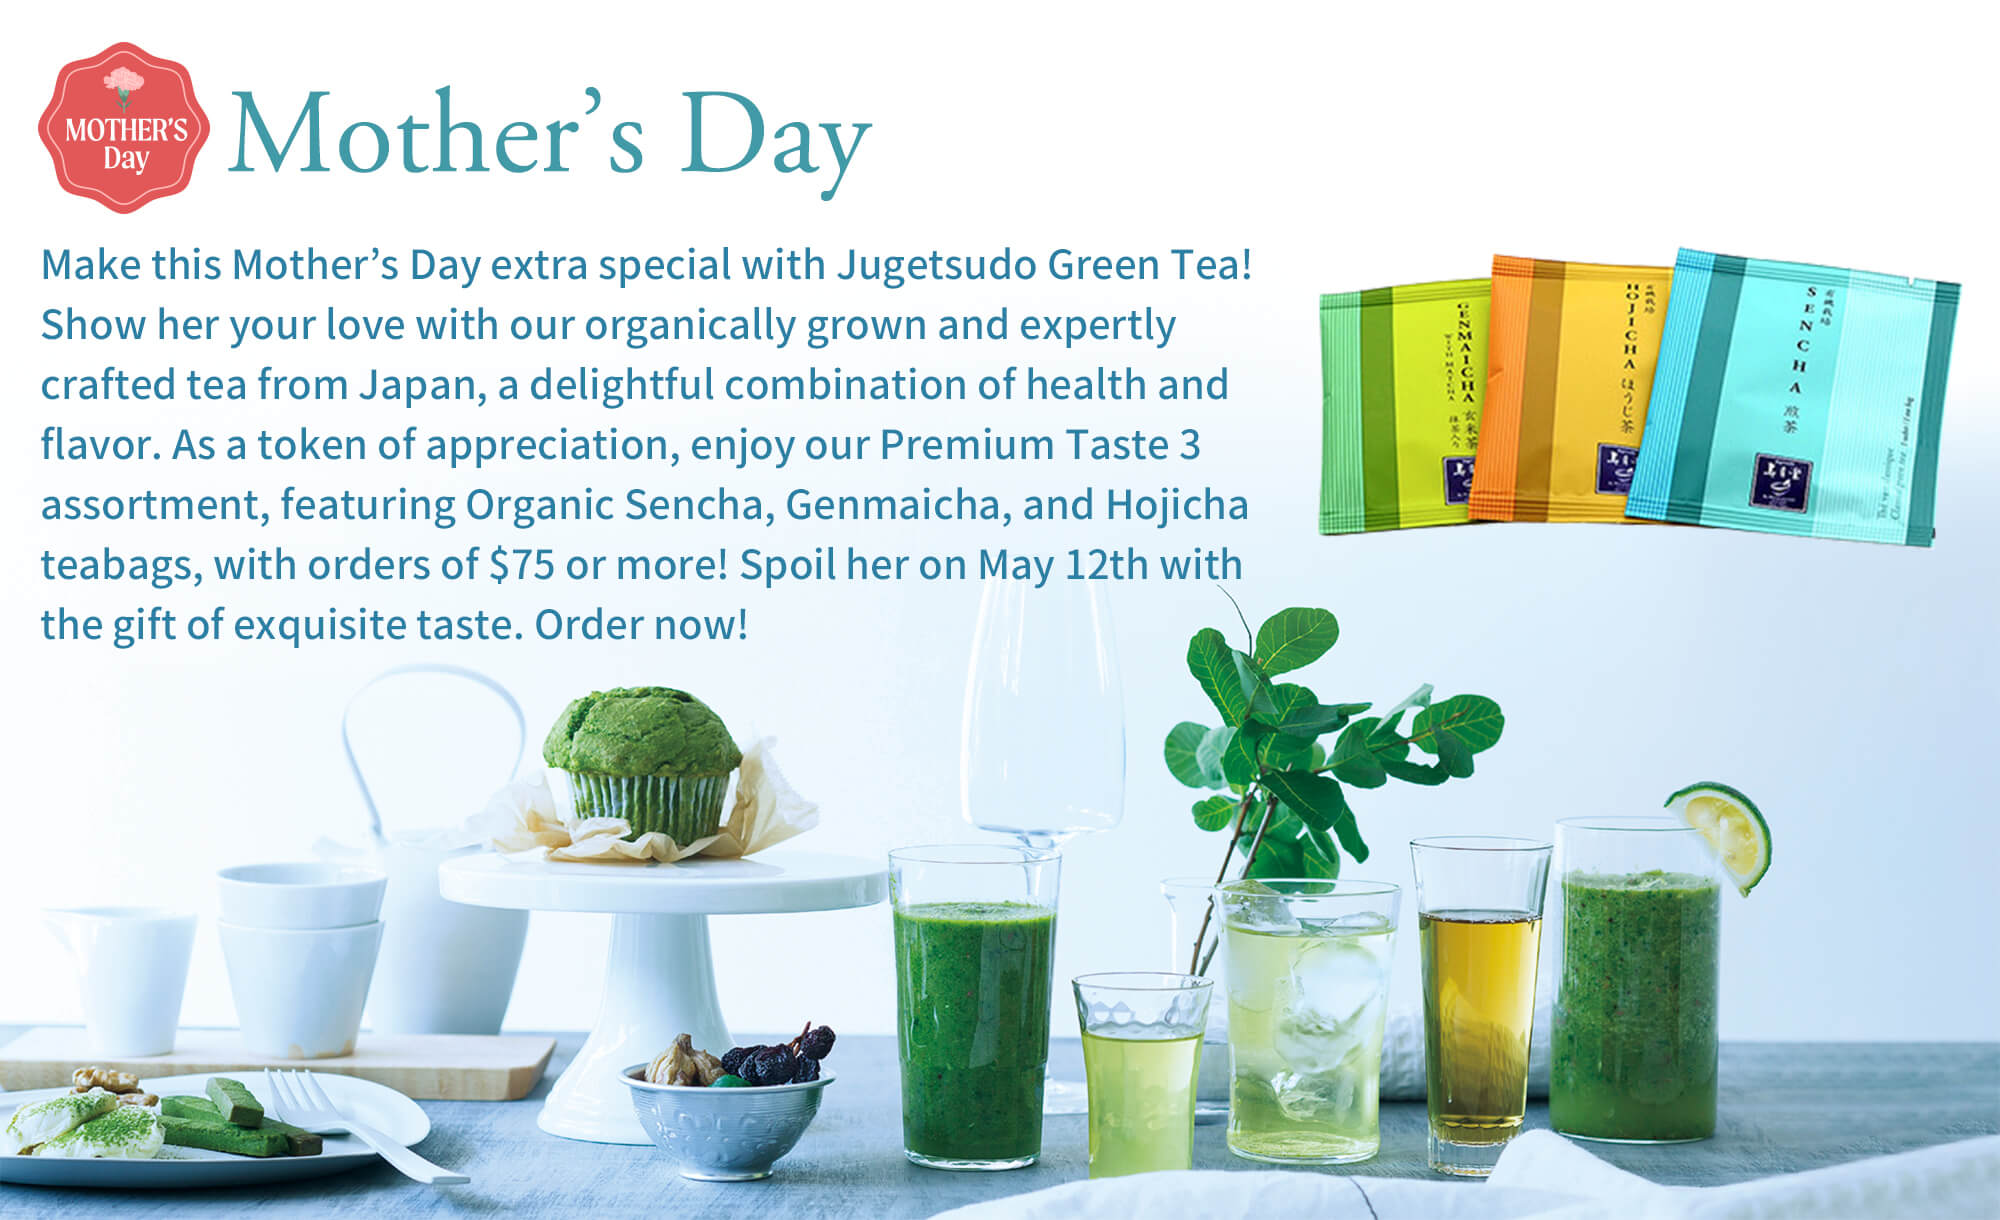 Mother’s Day  Make this Mother’s Day extra special with Jugetsudo Green Tea! Show her your love with our organically grown and expertly crafted tea from Japan, a delightful combination of health and flavor. As a token of appreciation, enjoy our Premium Taste 3 assortment, featuring Organic Sencha, Genmaicha, and Hojicha teabags, with orders of $75 or more! Spoil her on May 12th with the gift of exquisite taste. Order now!